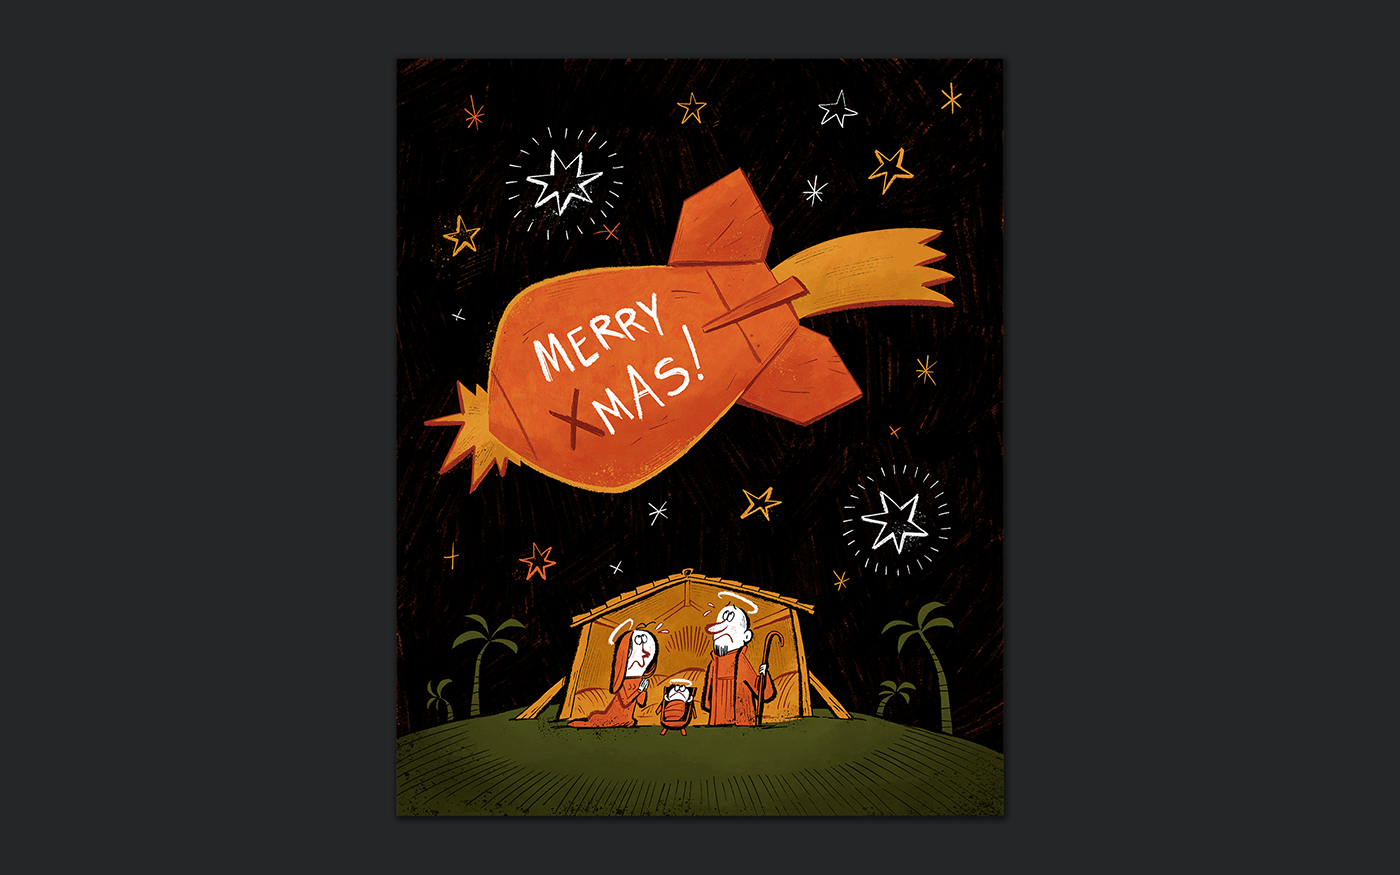 Editorial illustration for a christmas greeting card, with a political edge. Nativity scene